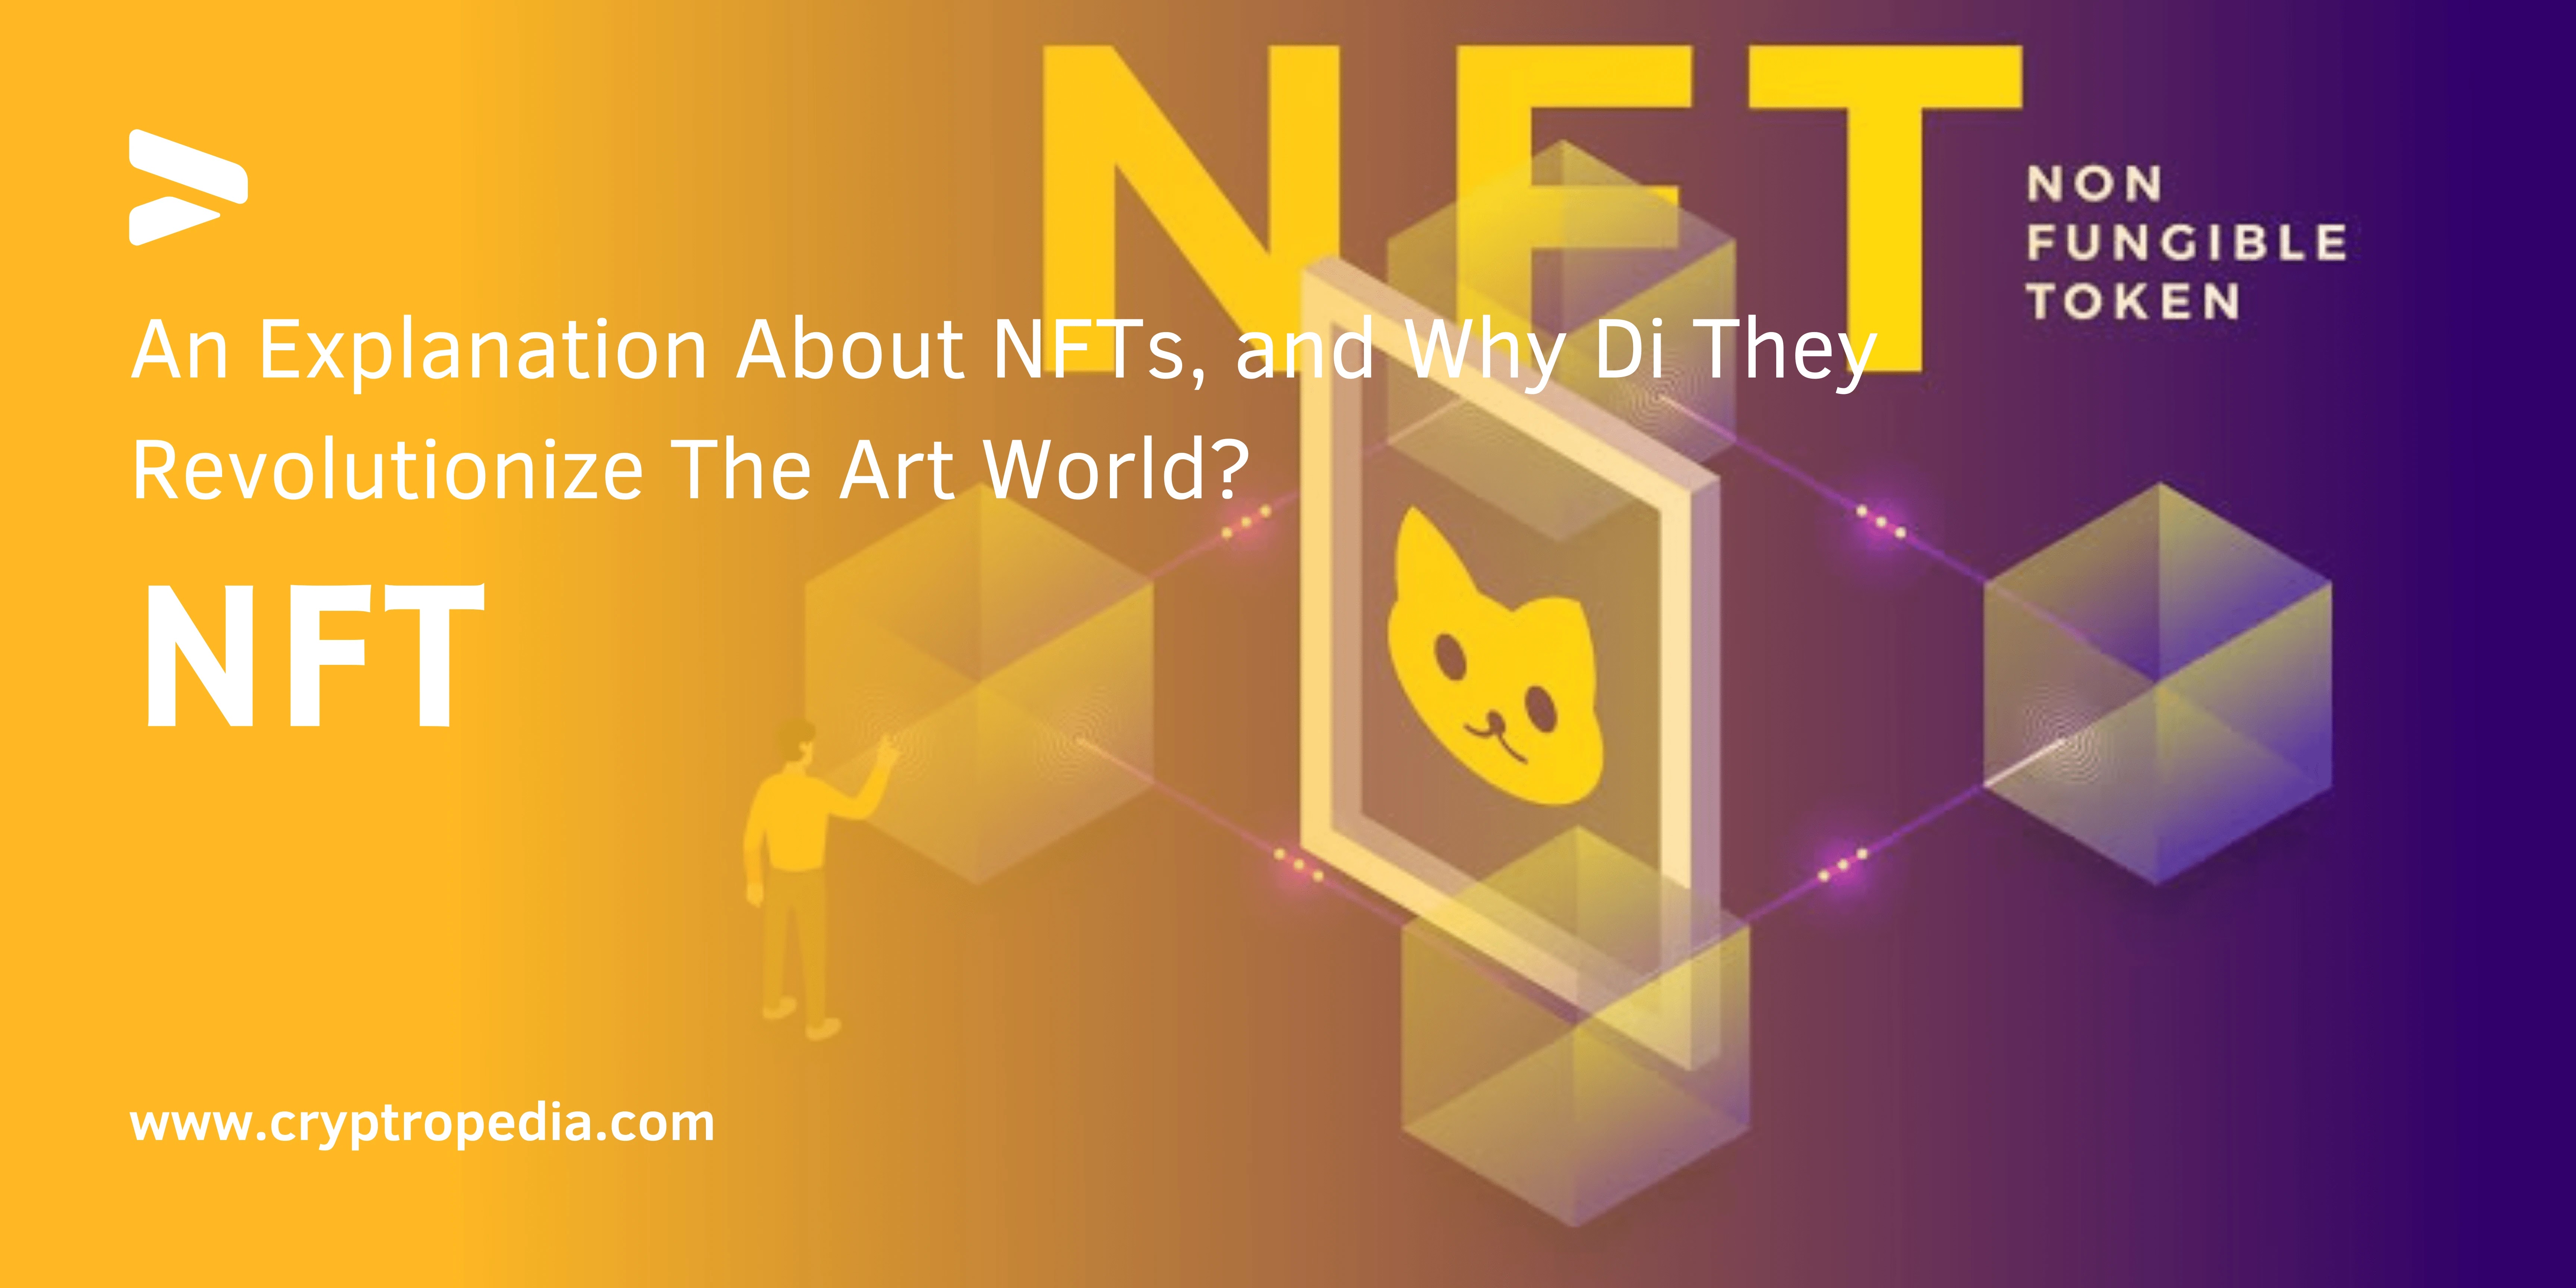 An Explanation About NFTs, and Why Did They Revolutionize The Art World?